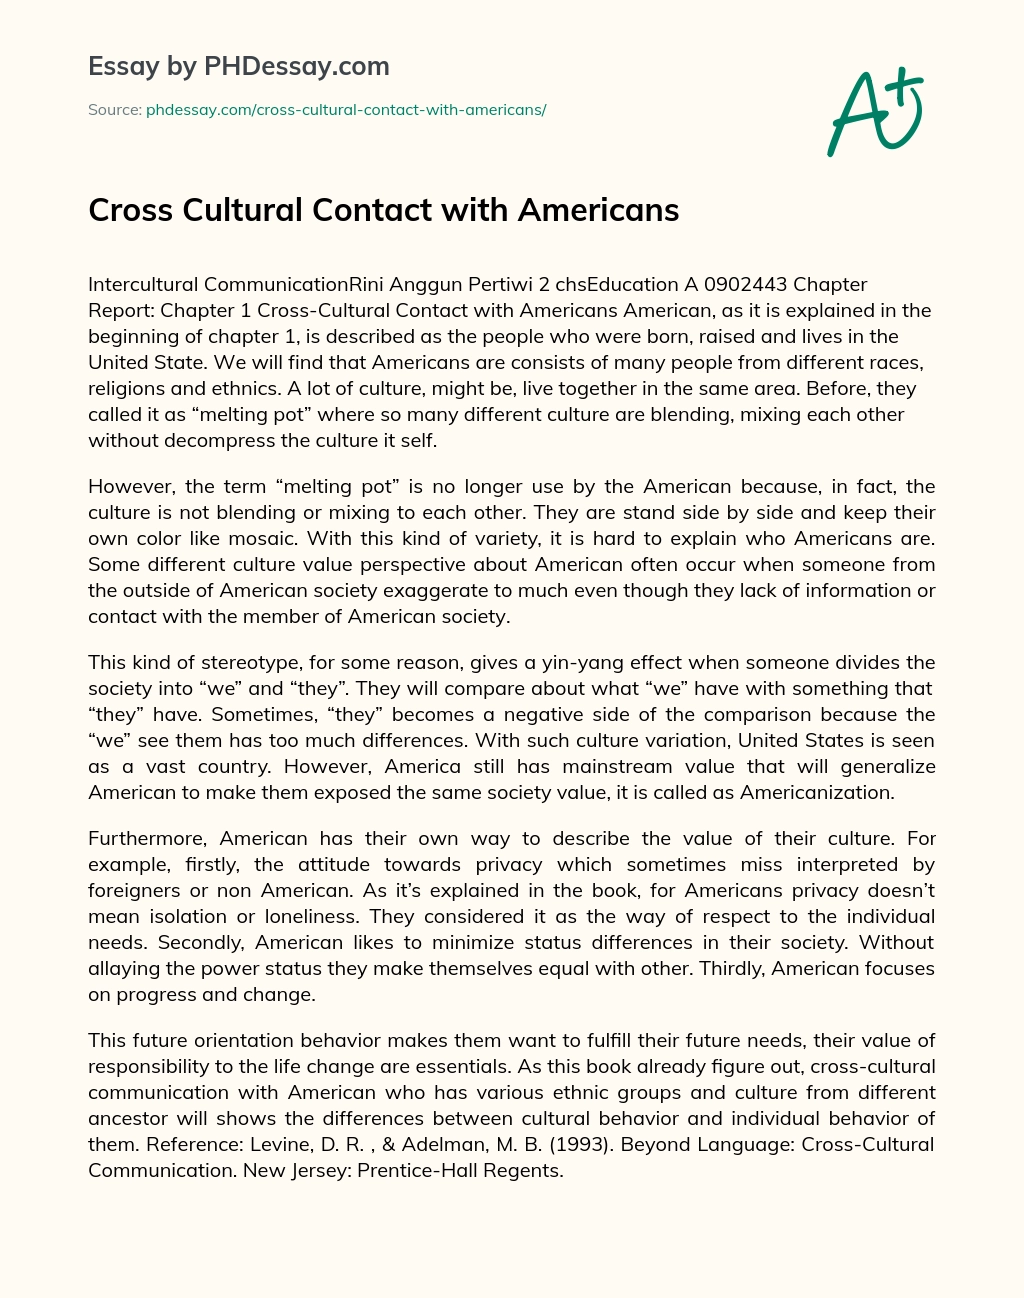 Cross Cultural Contact with Americans essay